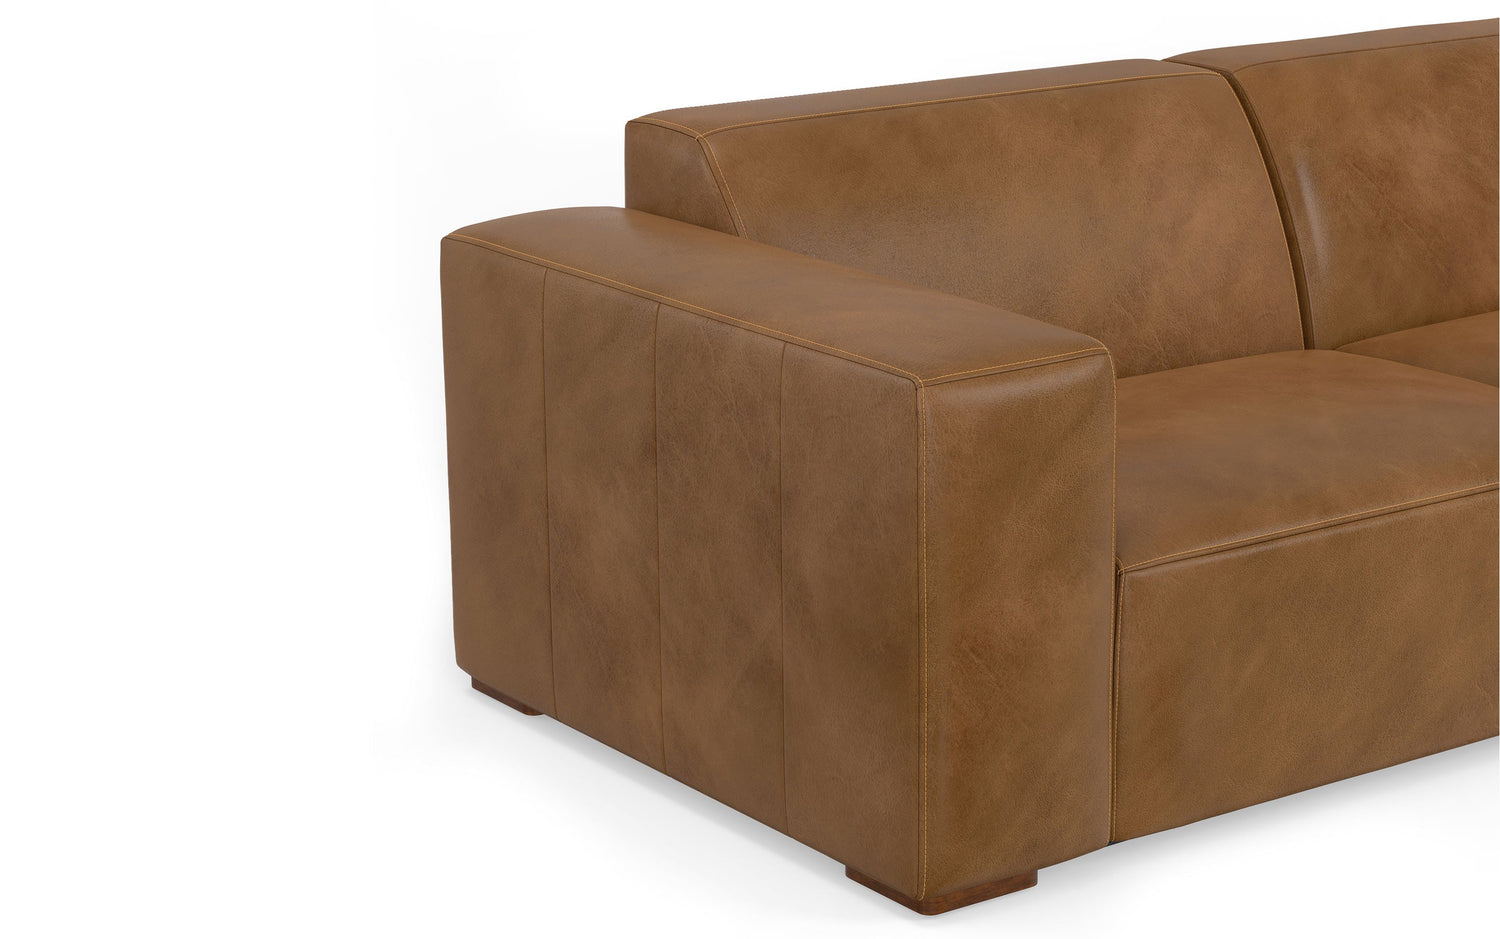 Caramel Brown Genuine Leather | Rex 2 Seater Sofa in Genuine Leather